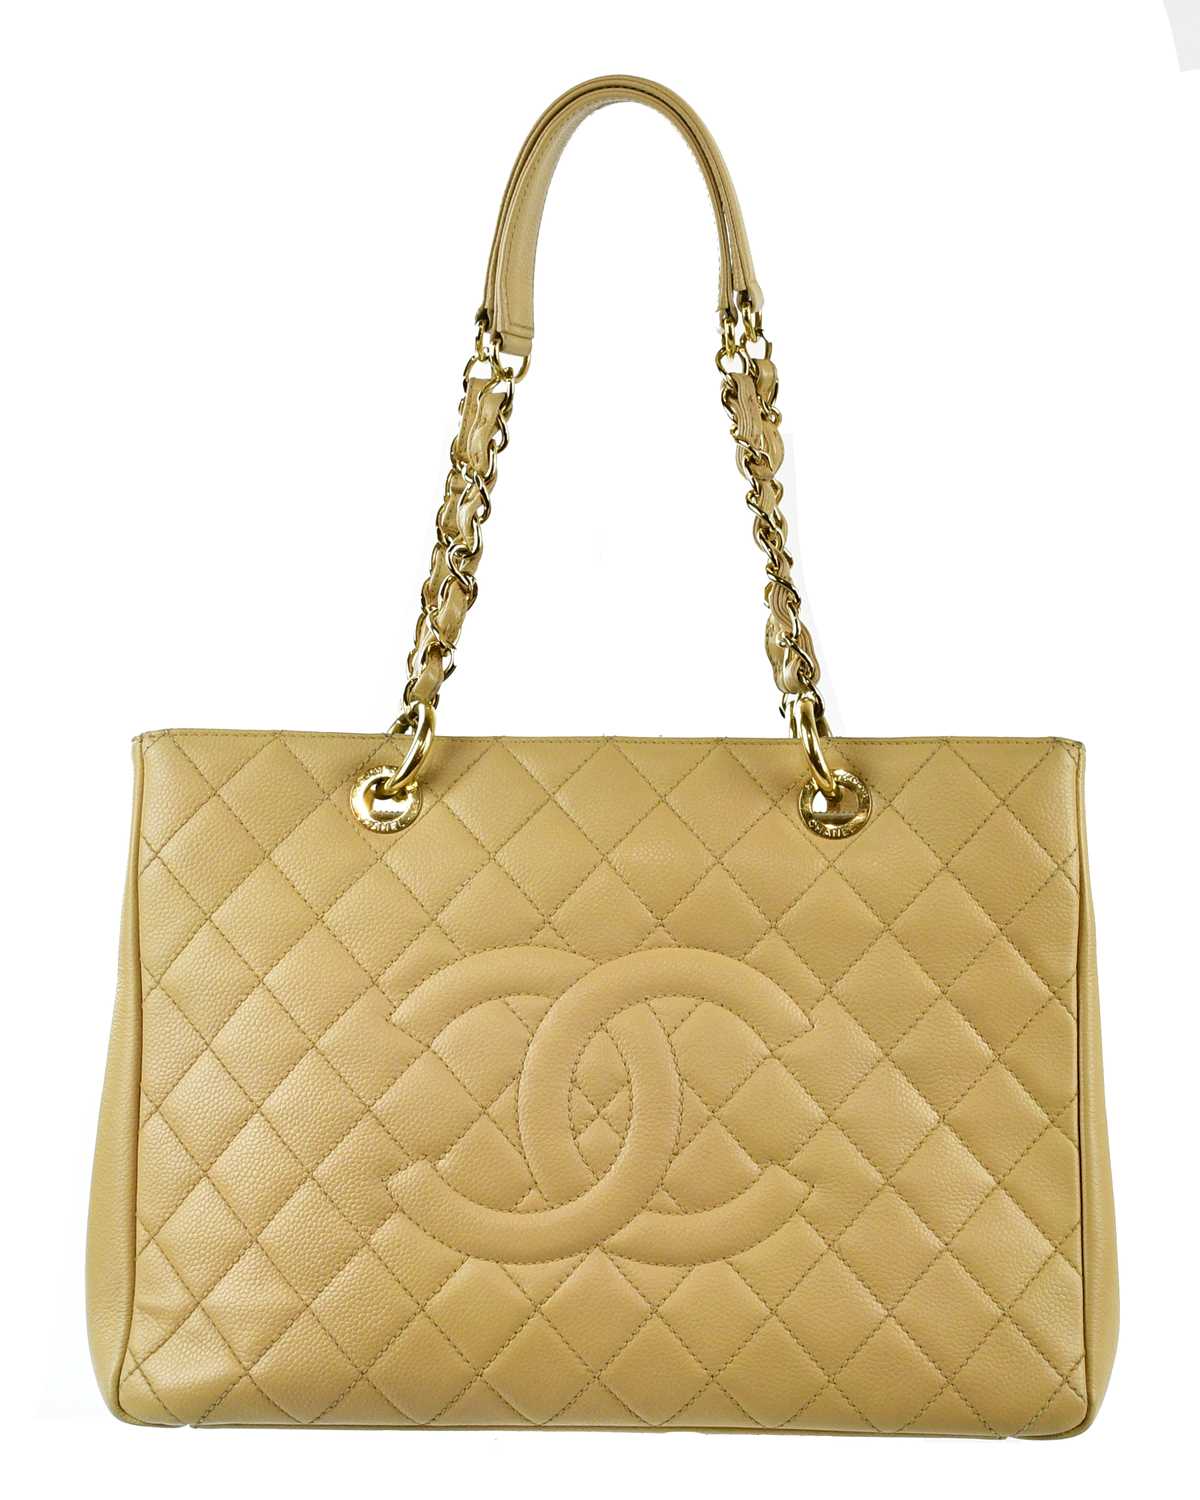 CHANEL; a cream circa 2014 caviar leather quilted GST grand shopping tote bag with signature